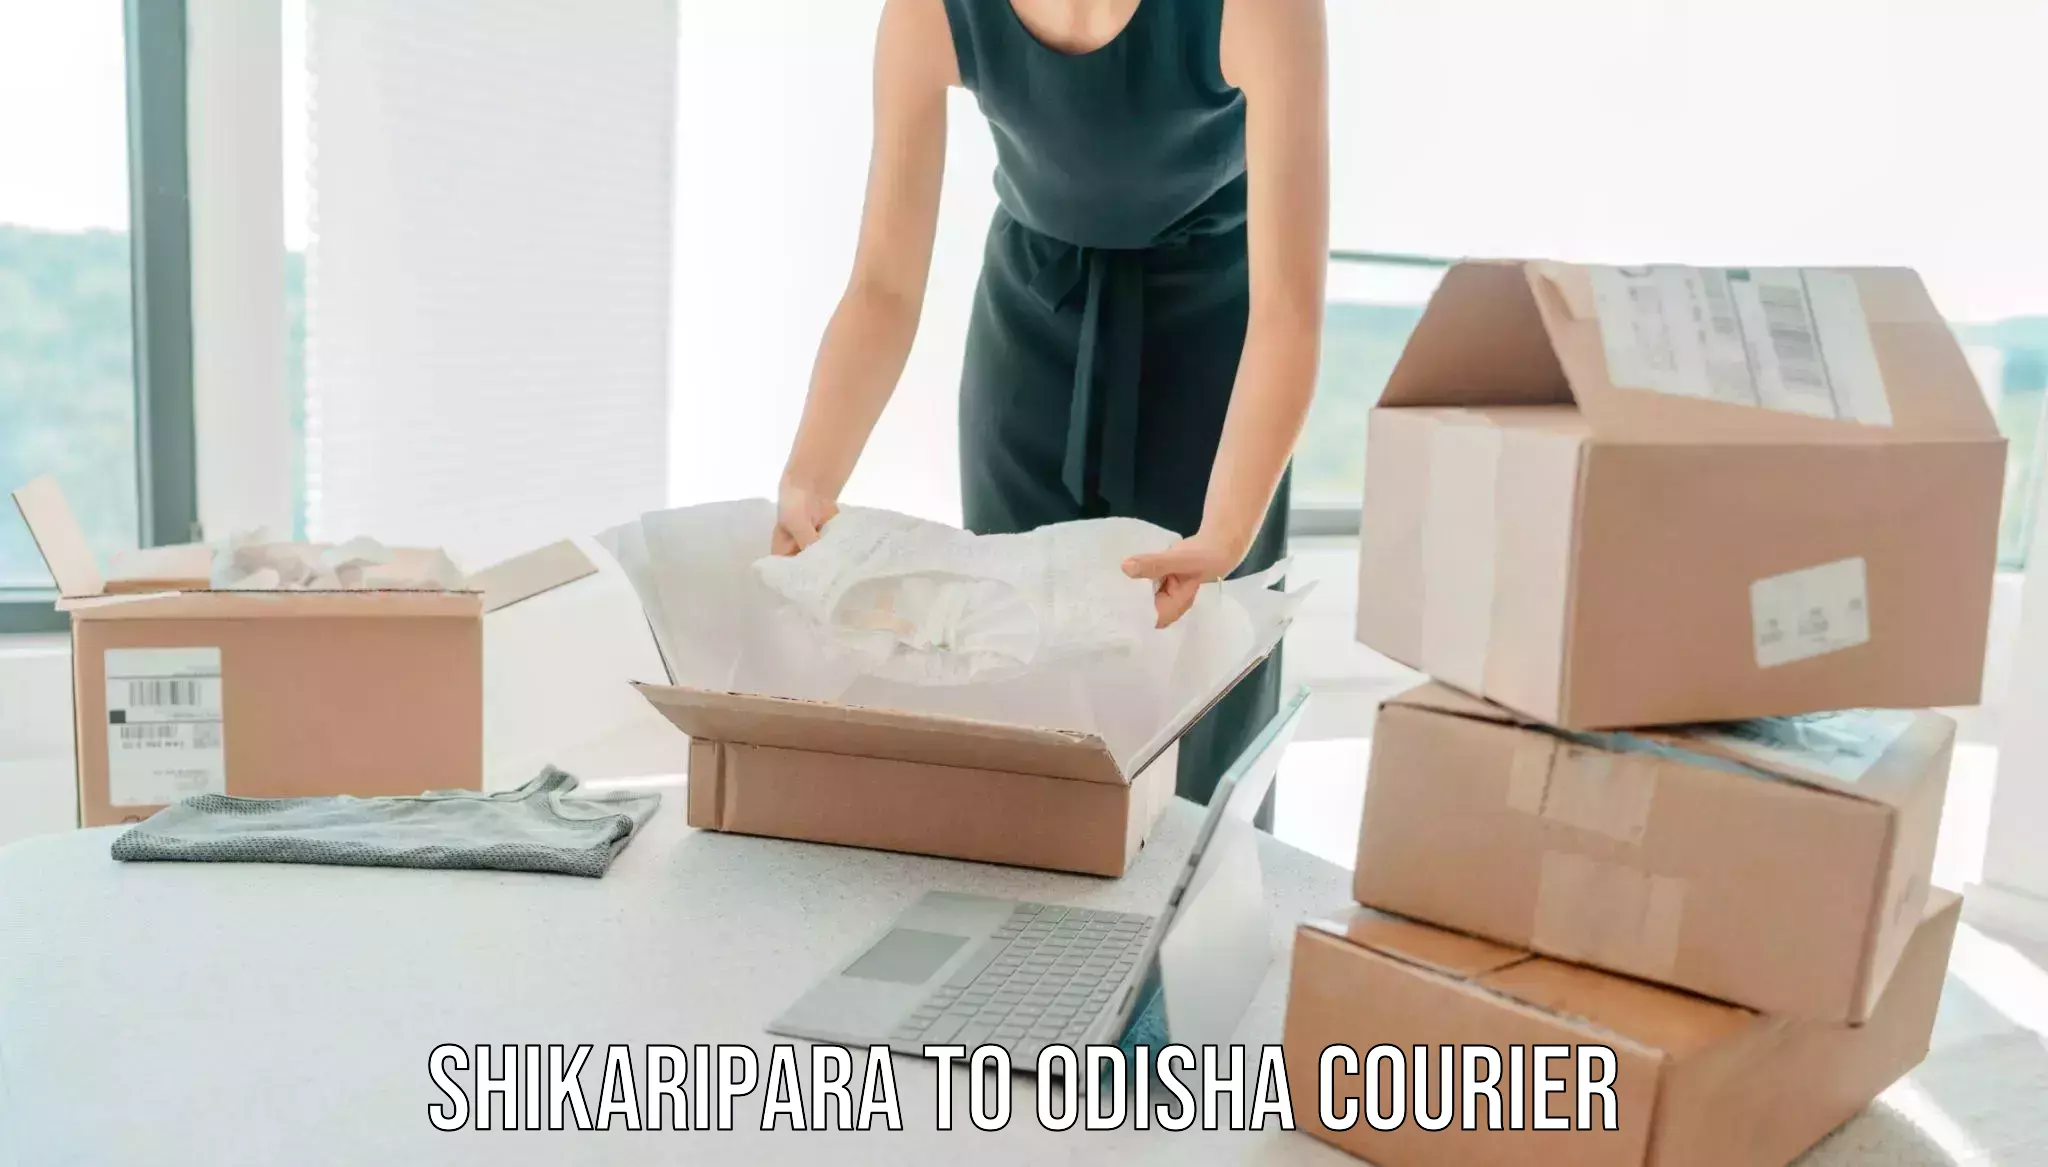 Trusted relocation experts Shikaripara to Talcher